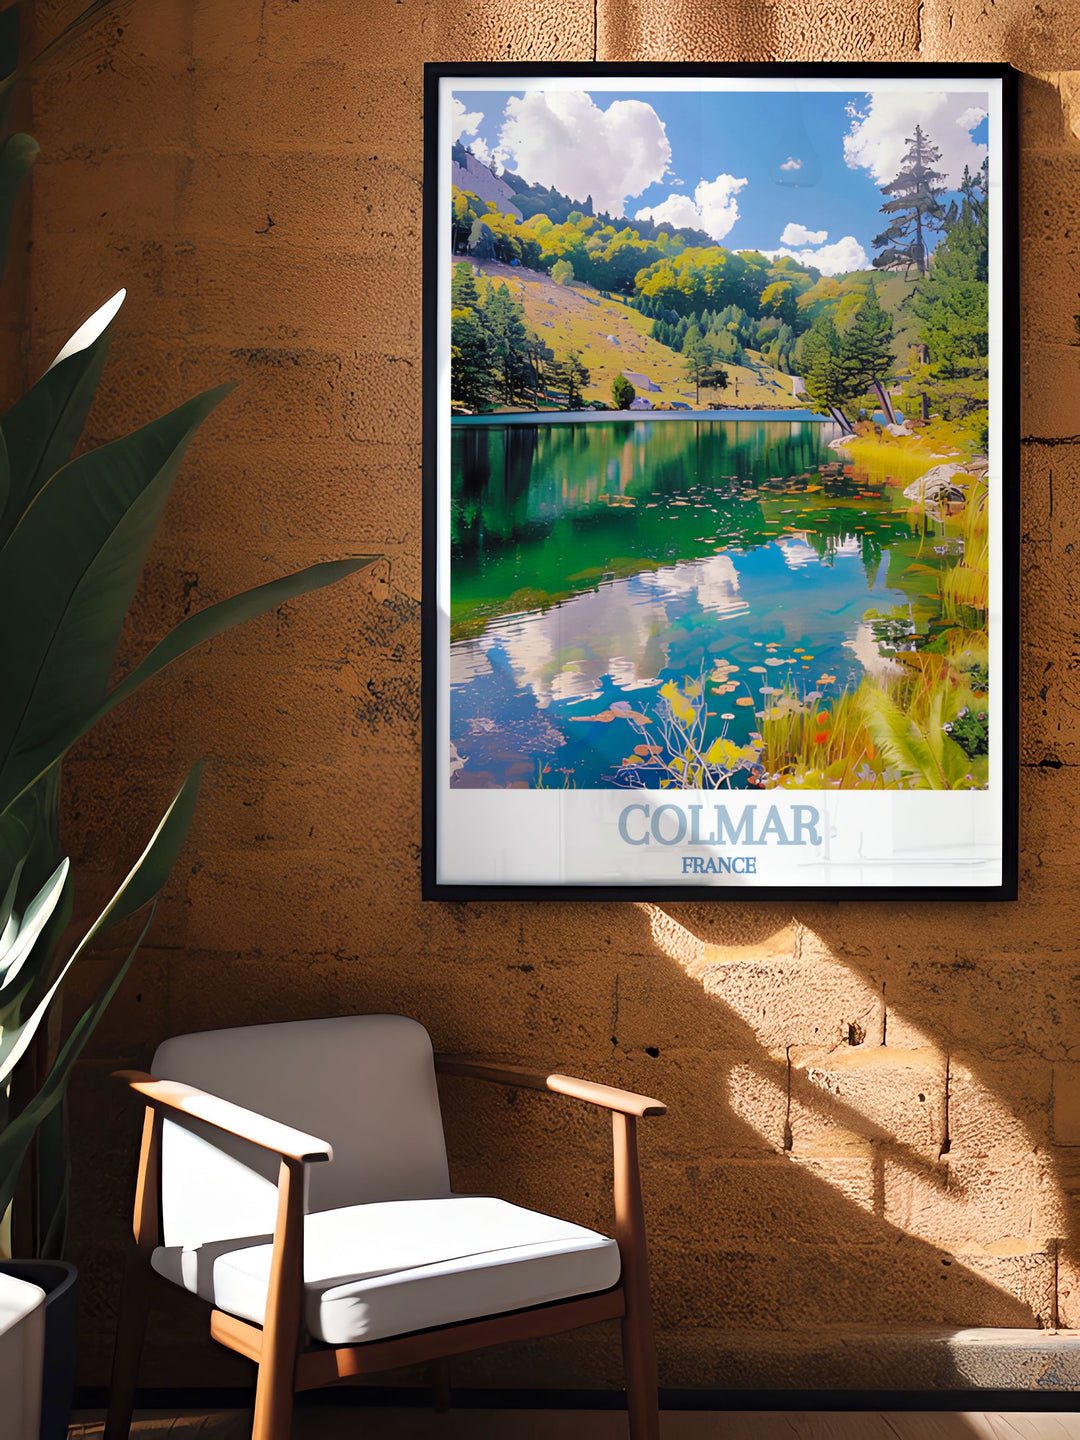 Capture the essence of Lac de lIll in Colmar, offering picturesque views, serene waters, and a peaceful atmosphere that complements the towns historic charm.